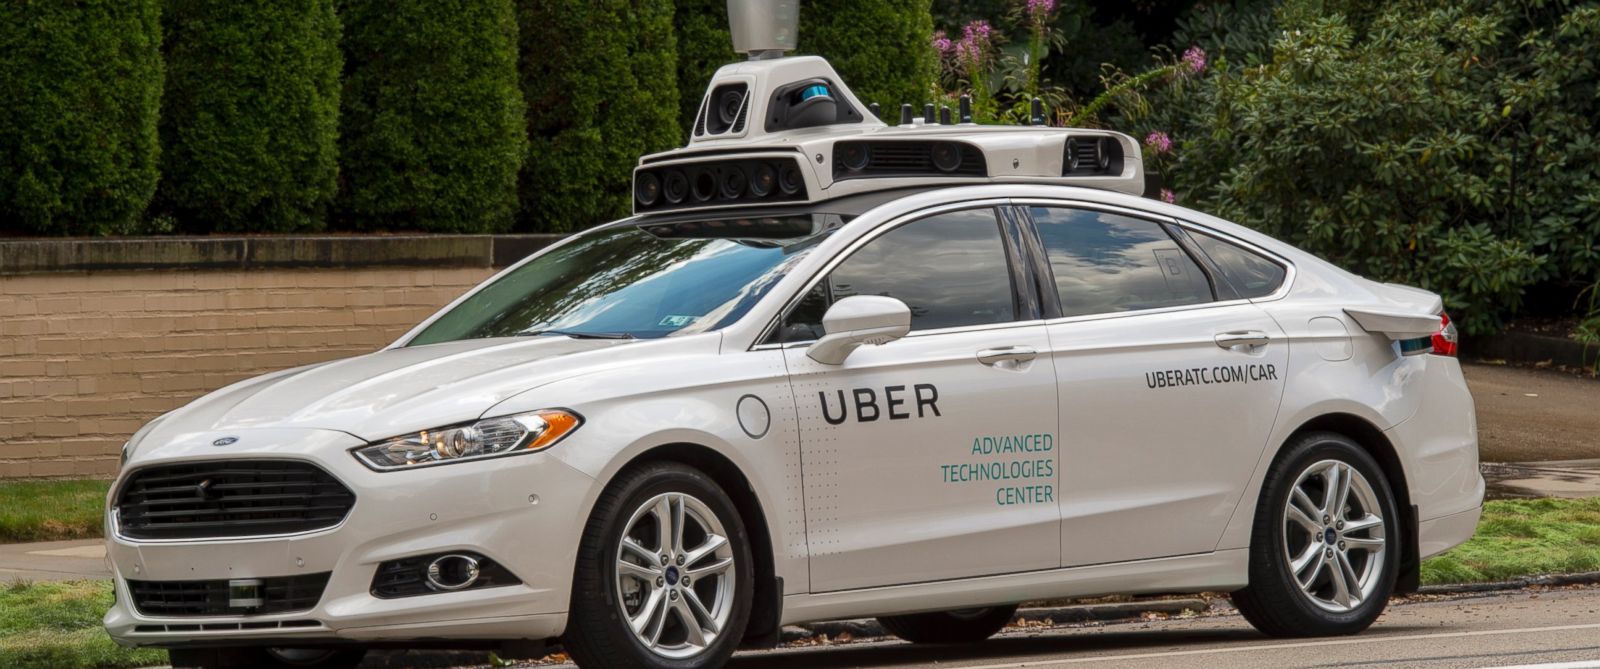 PHOTO: Uber is rolling out a fleet of "self-driving" cars in Pittsburgh with level 3 autonomy. Select riders in Pittsburgh could be paired with one of these vehicles.
